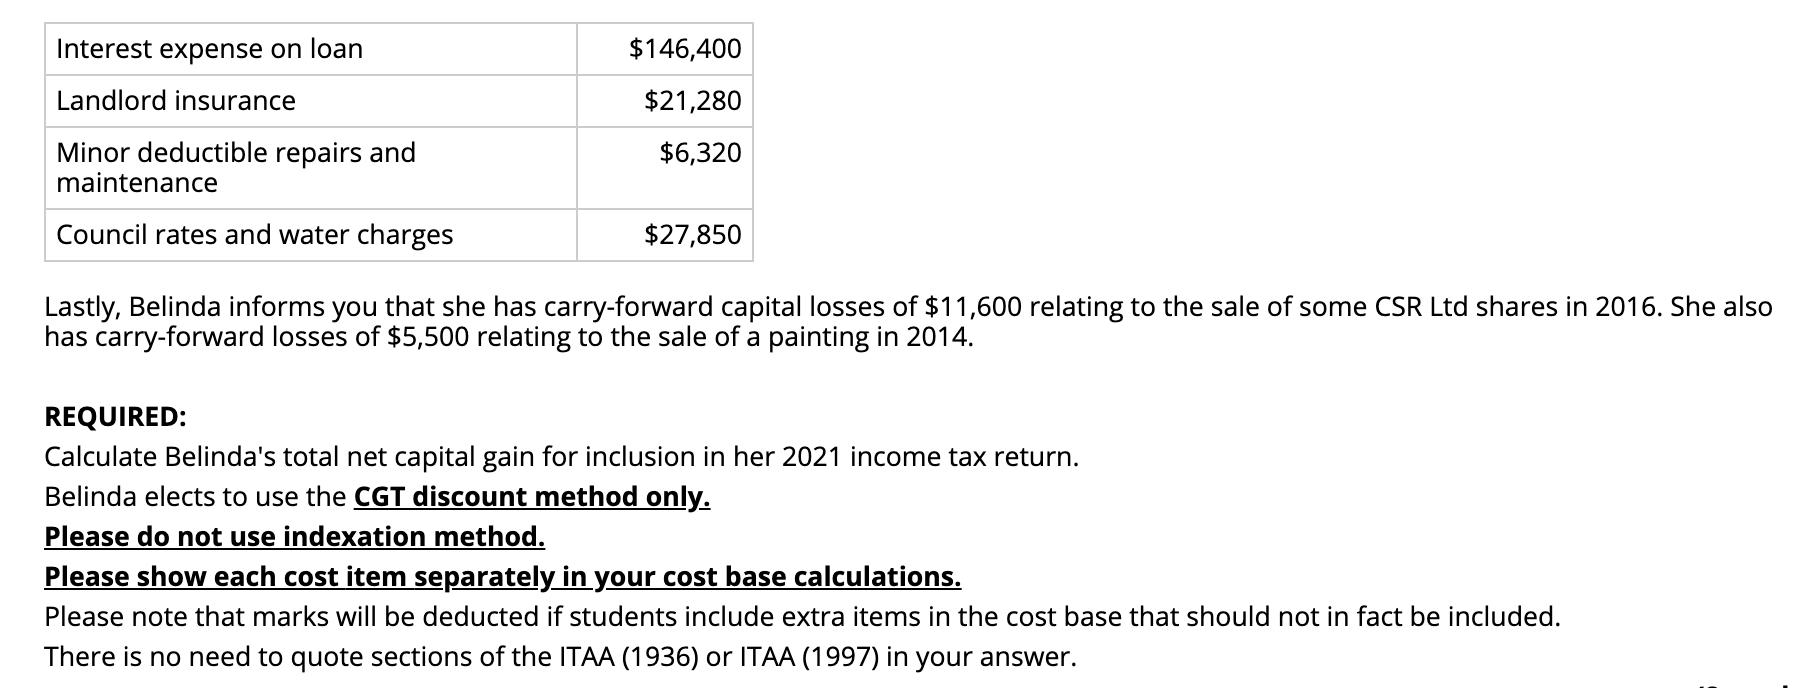 Lastly, Belinda informs you that she has carry-forward capital losses of ( $ 11,600 ) relating to the sale of some CSR Ltd